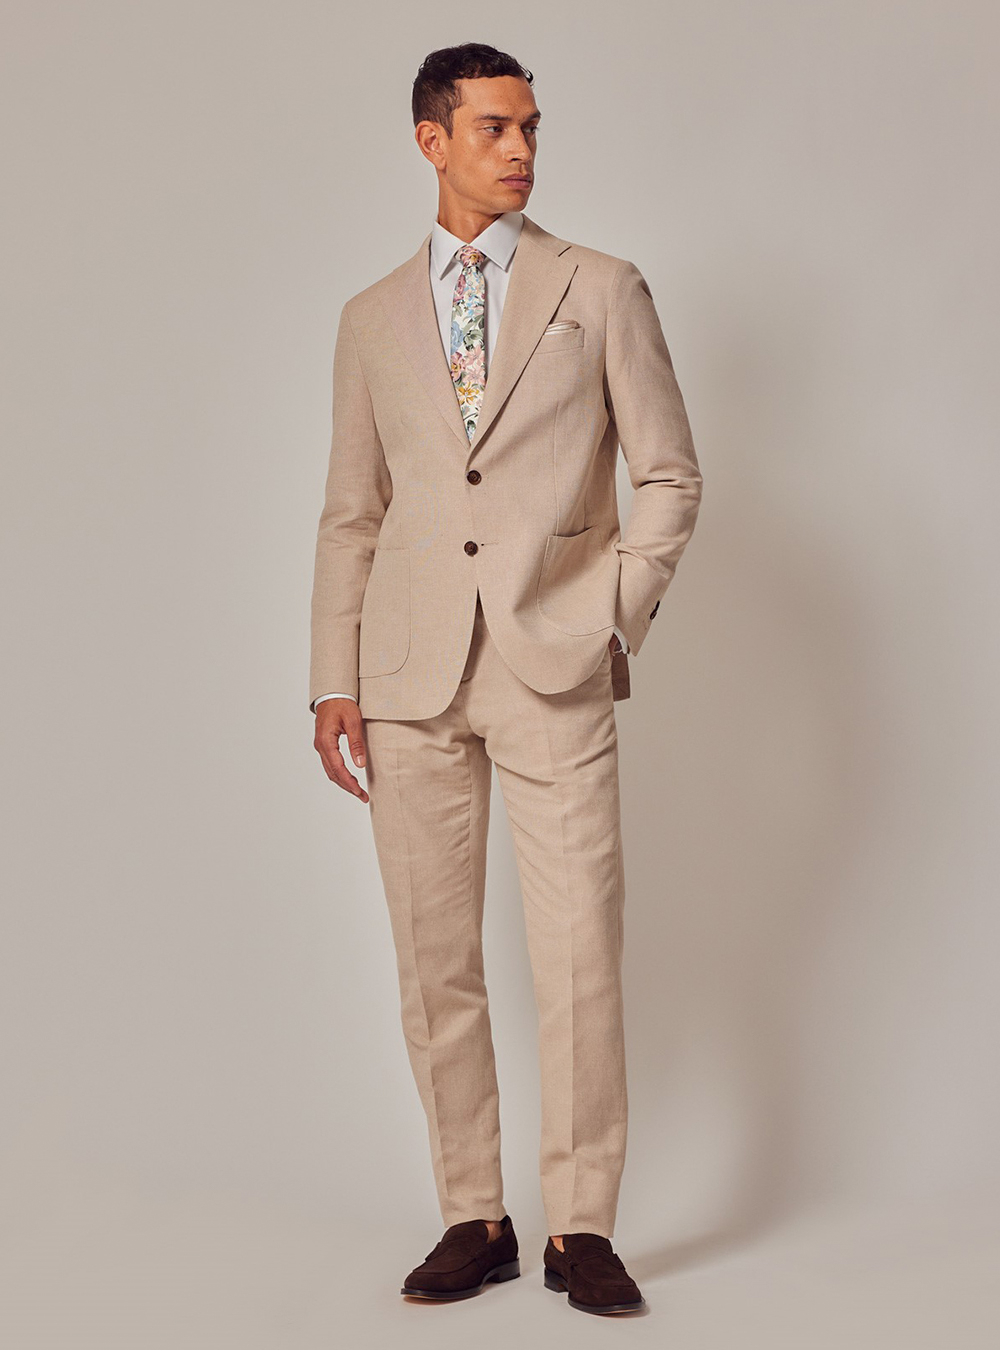 Tan suit, white dress shirt, floral tie and brown suede loafers